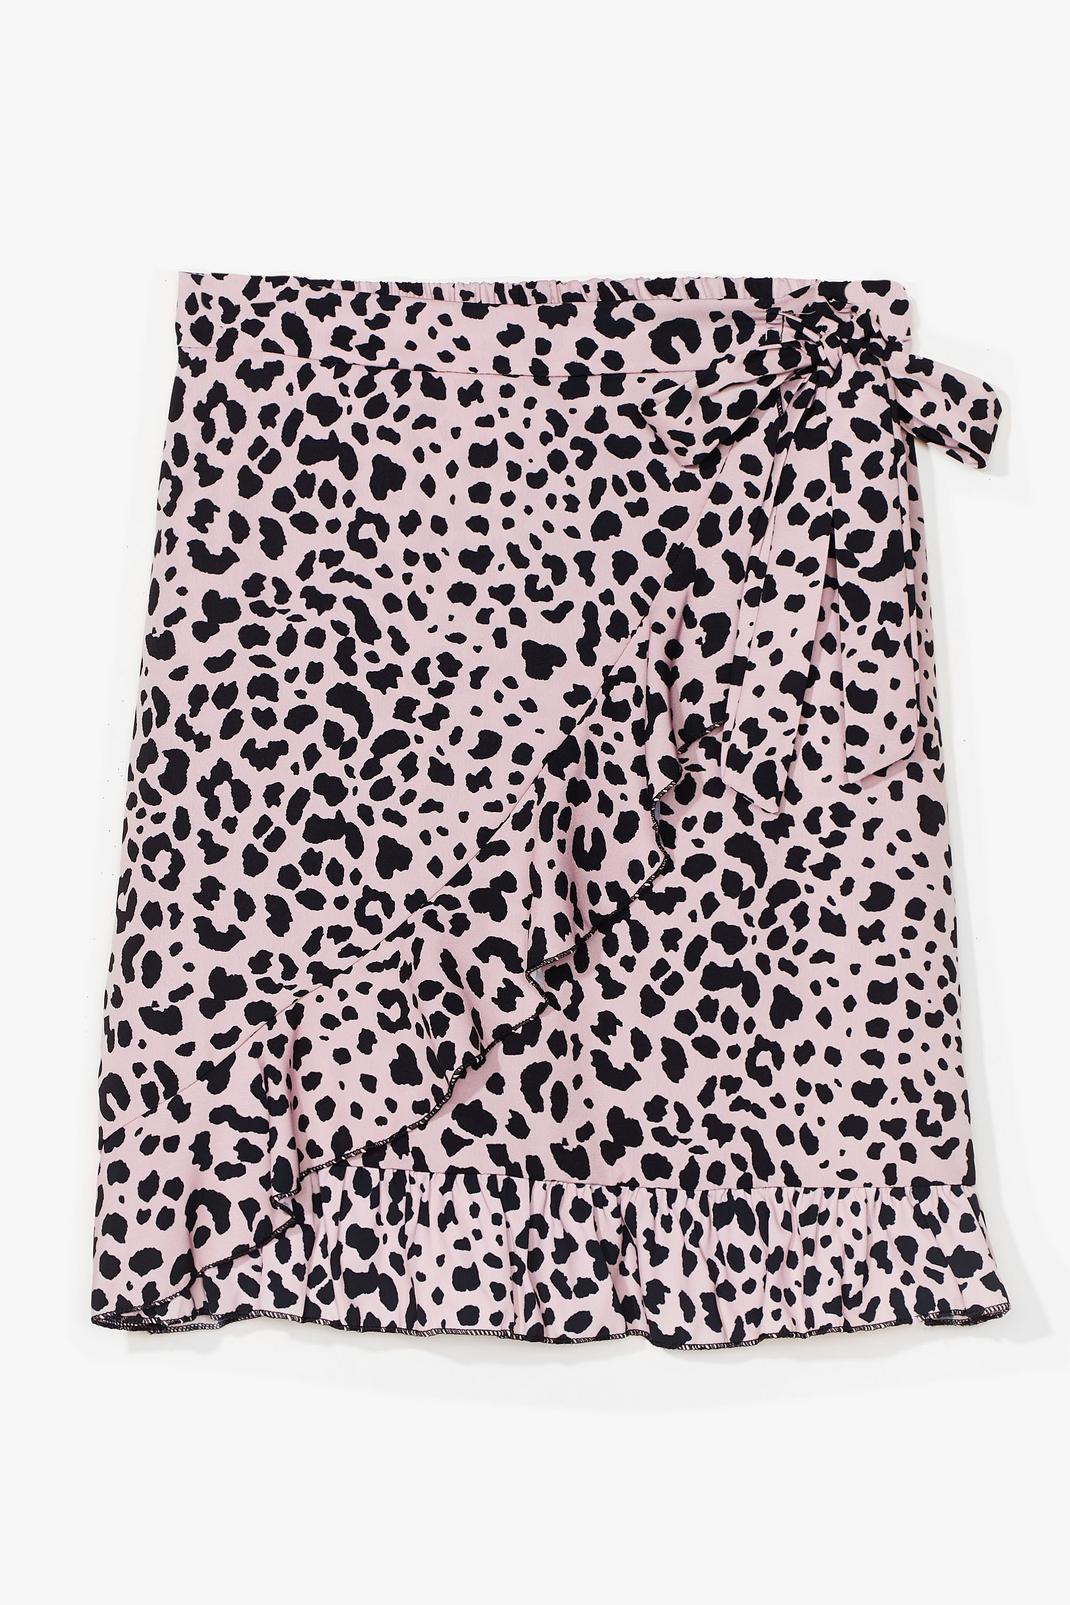 Living for the Meow-ment Leopard Mini Skirt image number 1